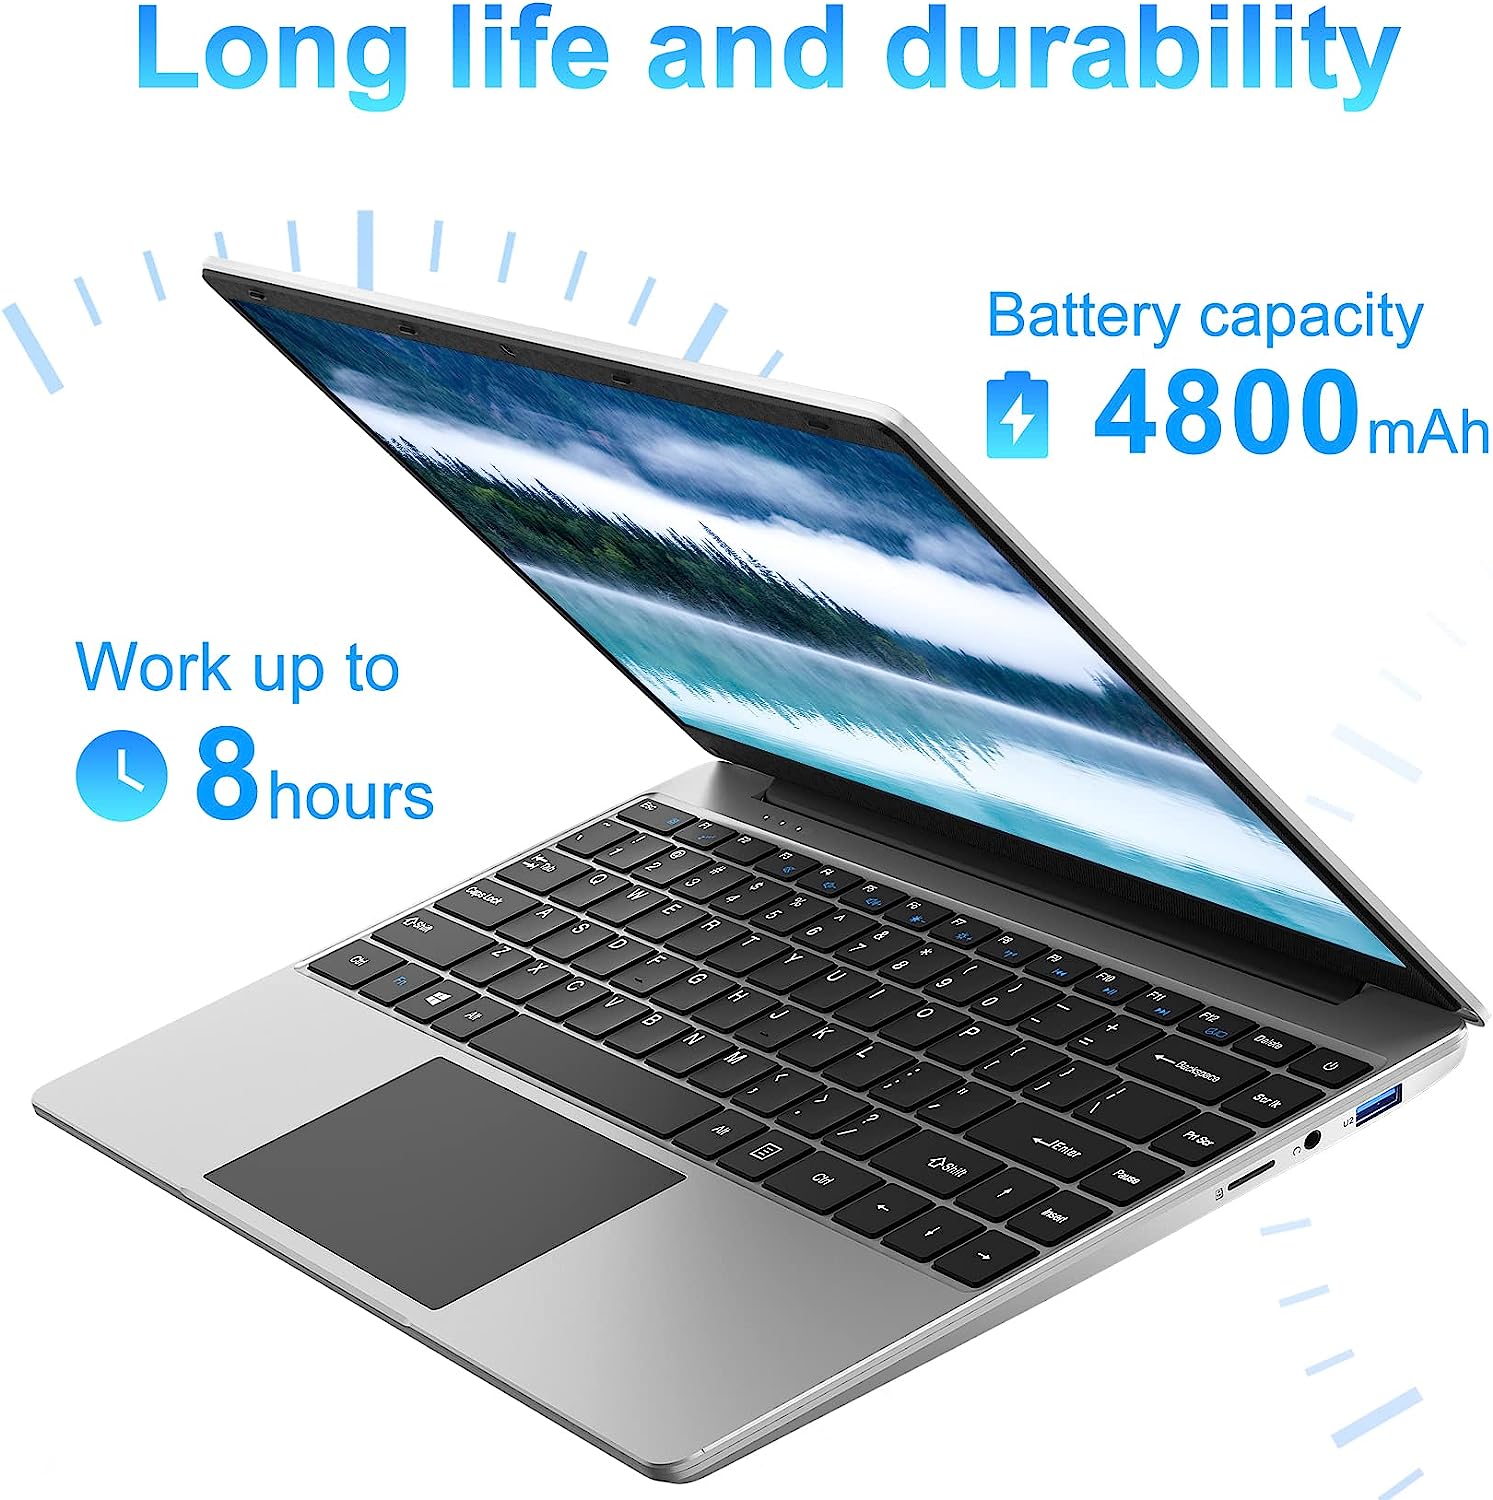 jumper Laptop 12GB DDR4 256GB SSD, Intel Celeron Quad Core CPU, Lightweight Computer with 14 Inch Full HD Display, Windows 11 Laptops, Dual Speakers, 2.4/5.0G WiFi, 35.52WH Battery, USB3.0, Type-C.